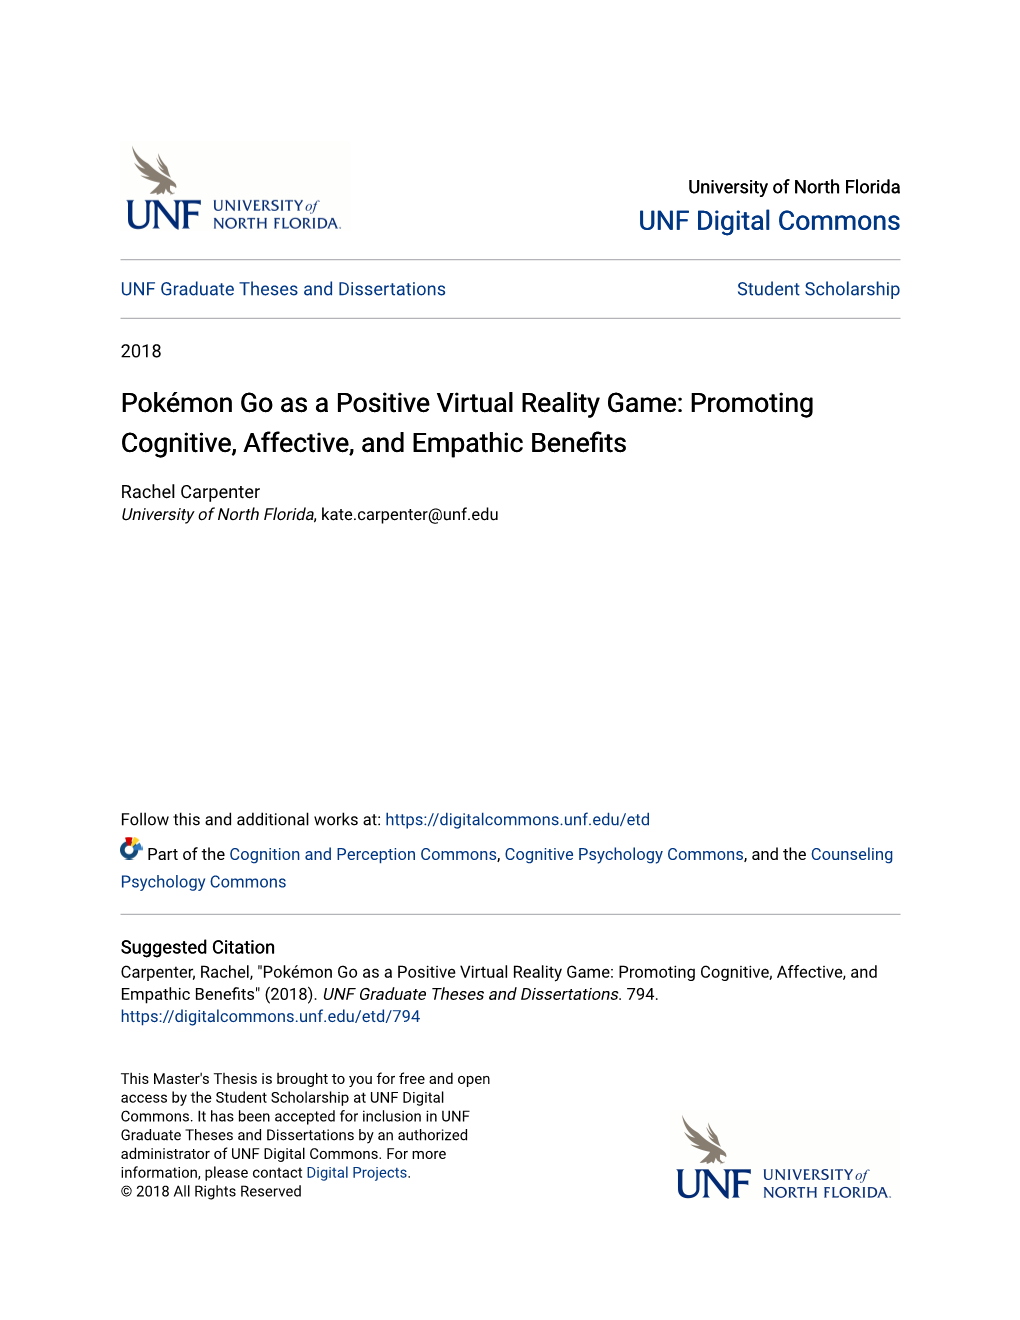 Pokémon Go As a Positive Virtual Reality Game: Promoting Cognitive, Affective, and Empathic Benefits